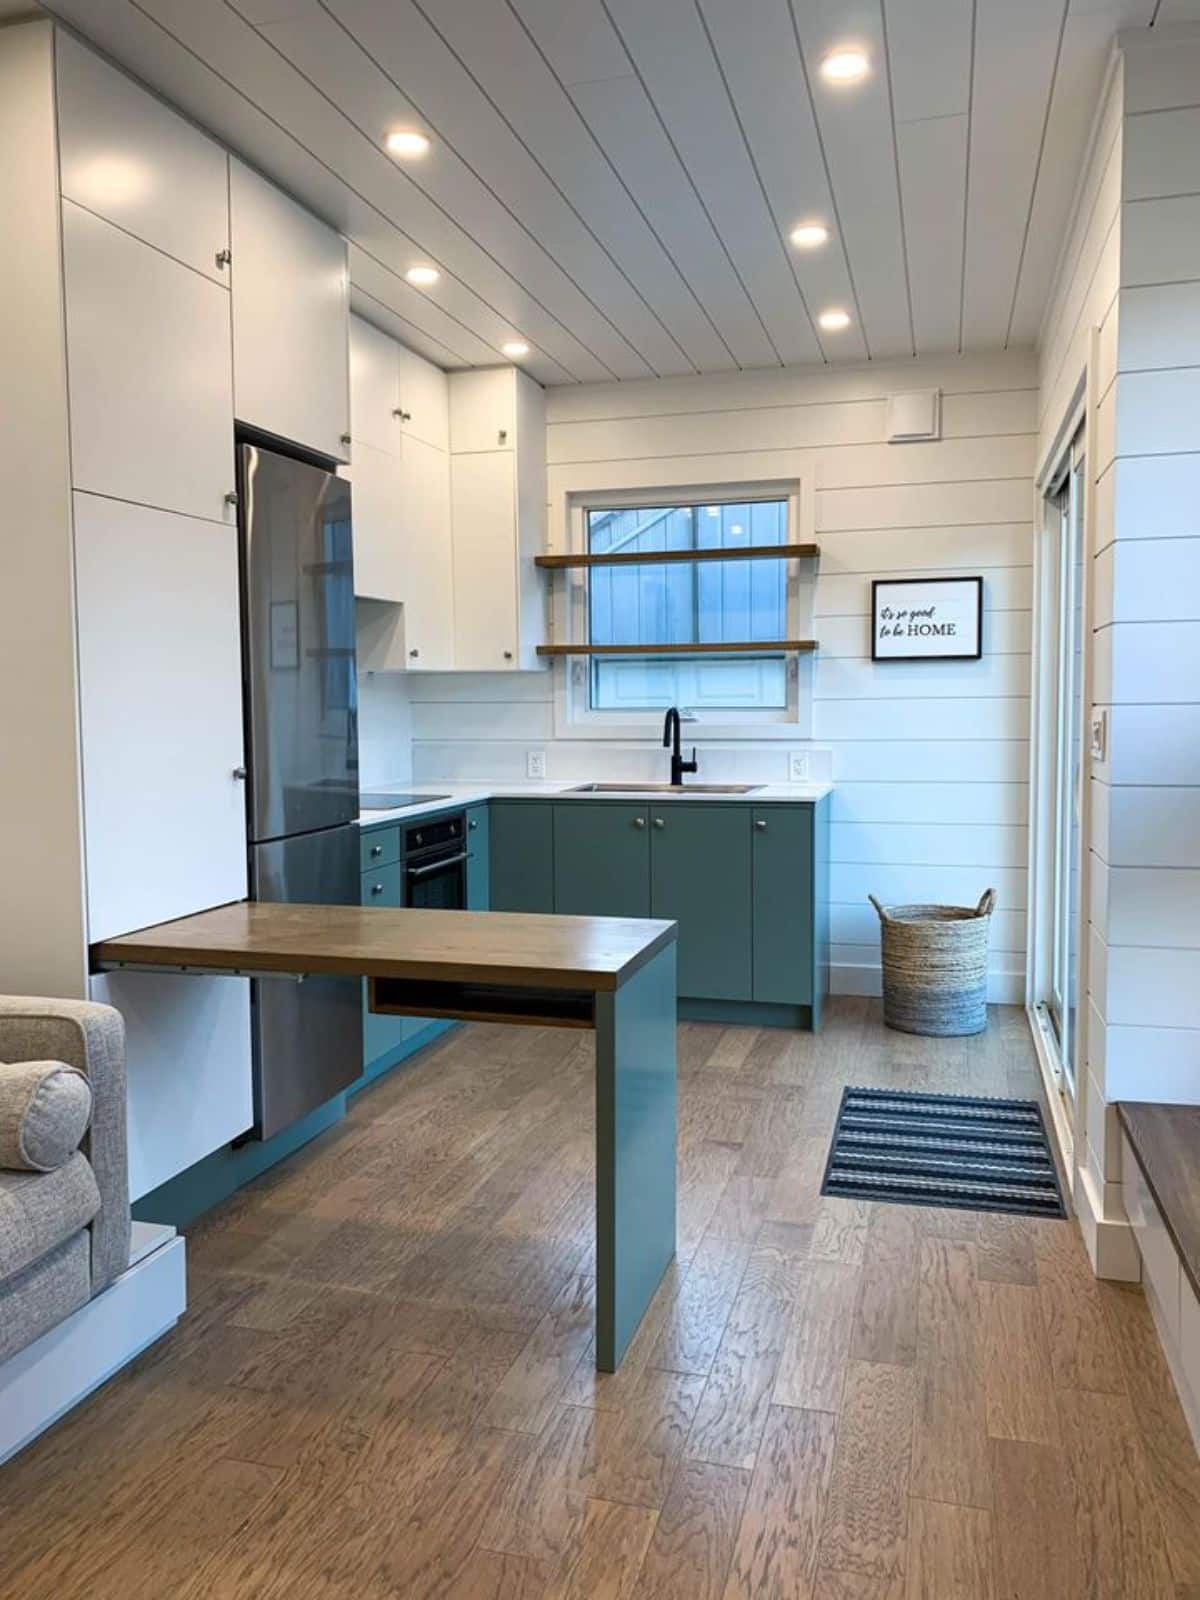 kitchen area of tiny home in Ontario is gorgeous with all the necessary appliances in order